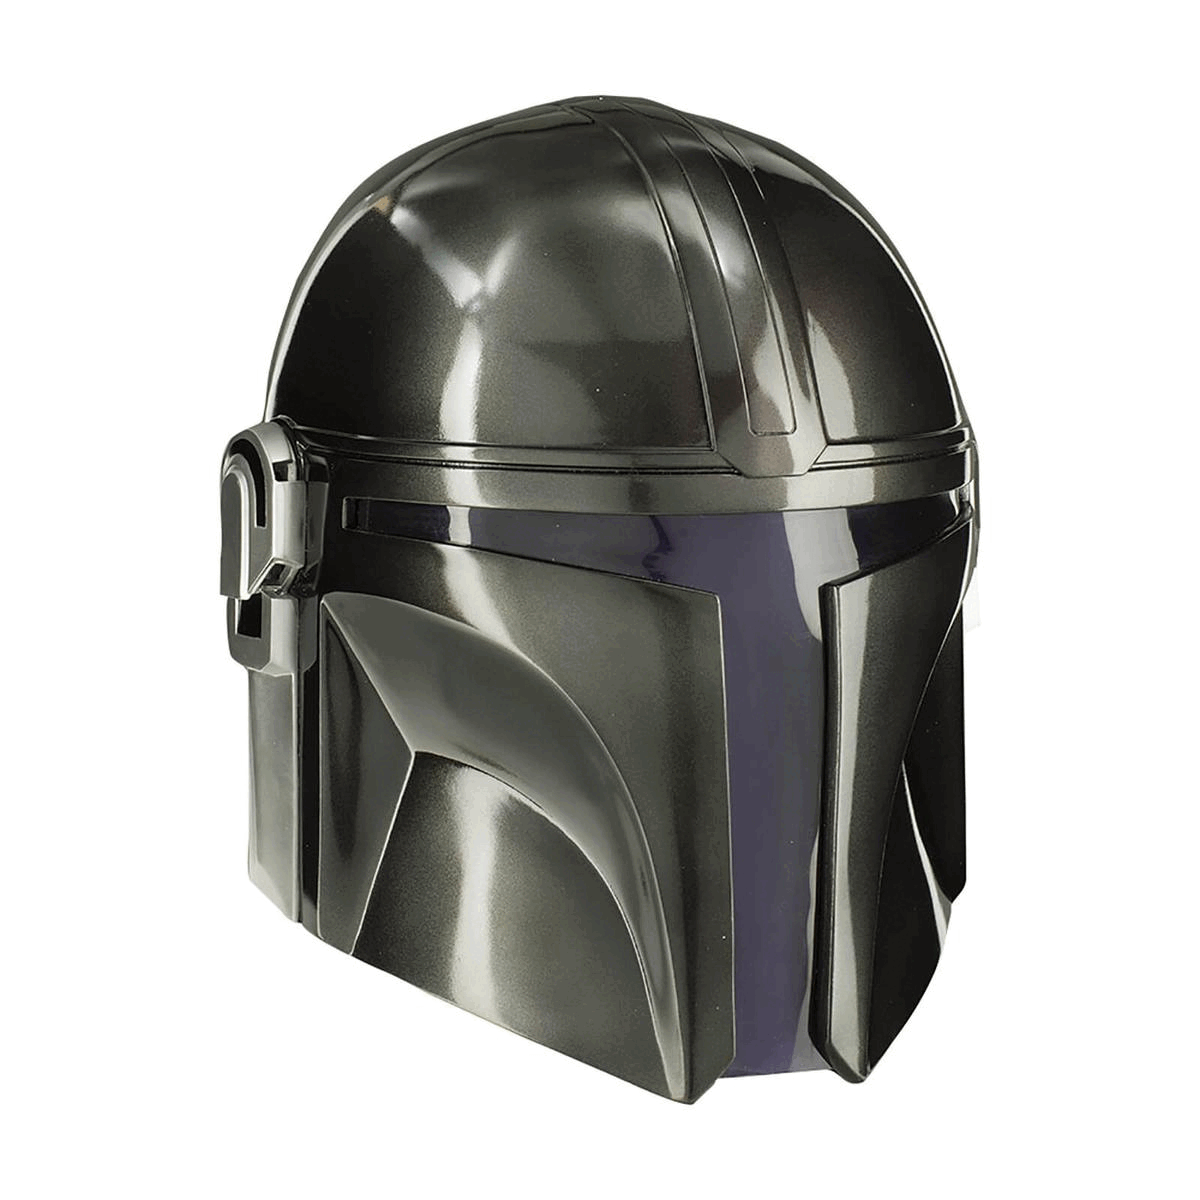 Gif showing the helmet from multiple angles